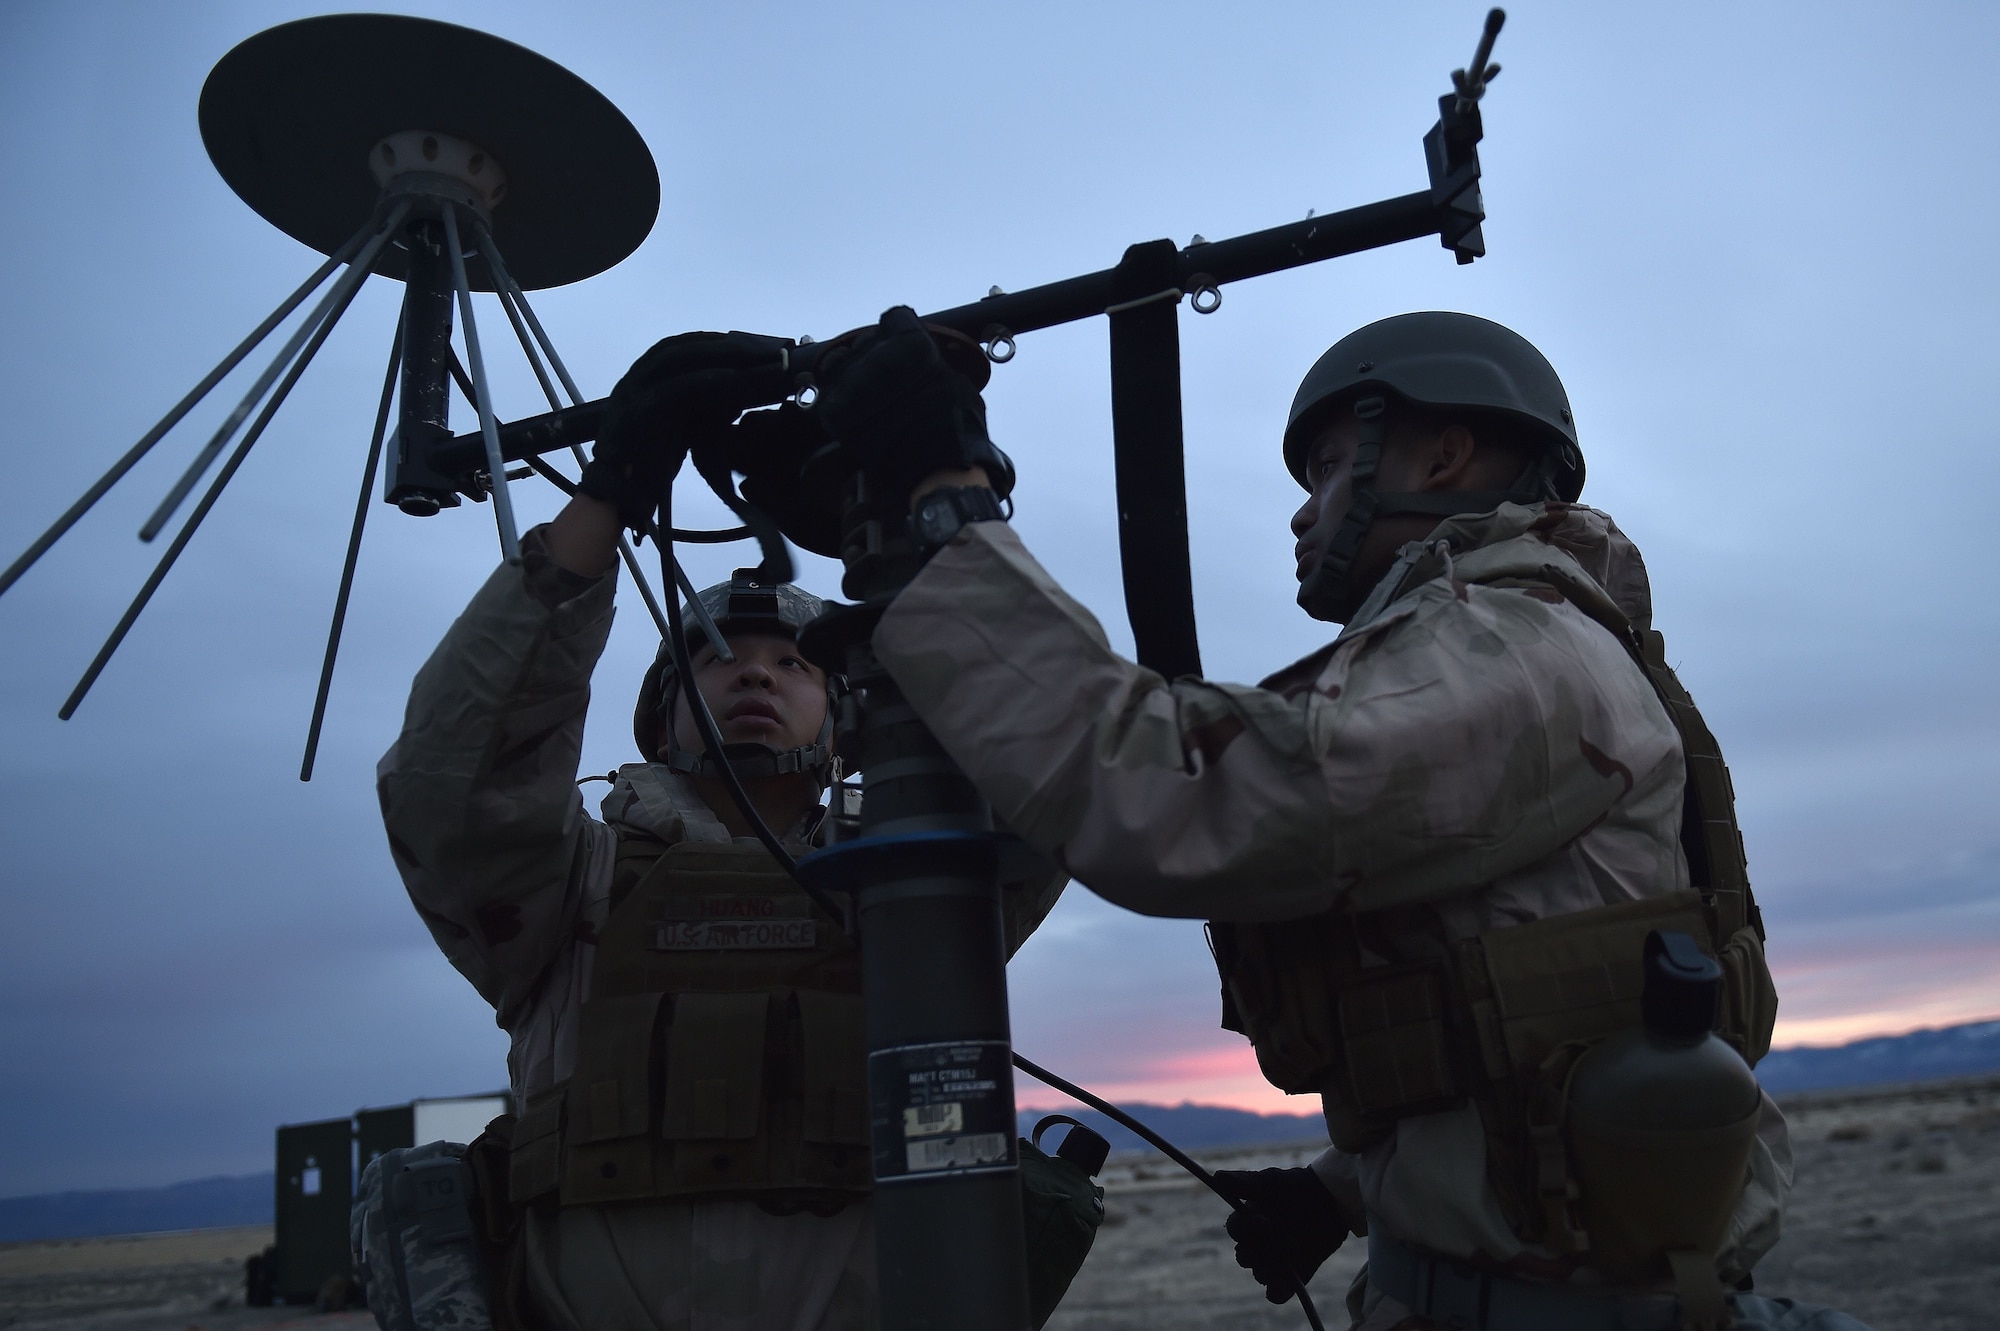 Senior Airmen Yuhao Huang and Zyrus Medina, 821st Contingency Response Support Squadron frequency technicians, set-up a line of sight antenna while deployed to Amedee Army Airfield, Calif., as part of a week-long readiness exercise, Jan. 31, 2018.  The exercise evaluated the Airmen’s readiness and ability to execute and sustain rapid global mobility around the world. (U.S. Air Force photo by Tech. Sgt. Liliana Moreno/Released)